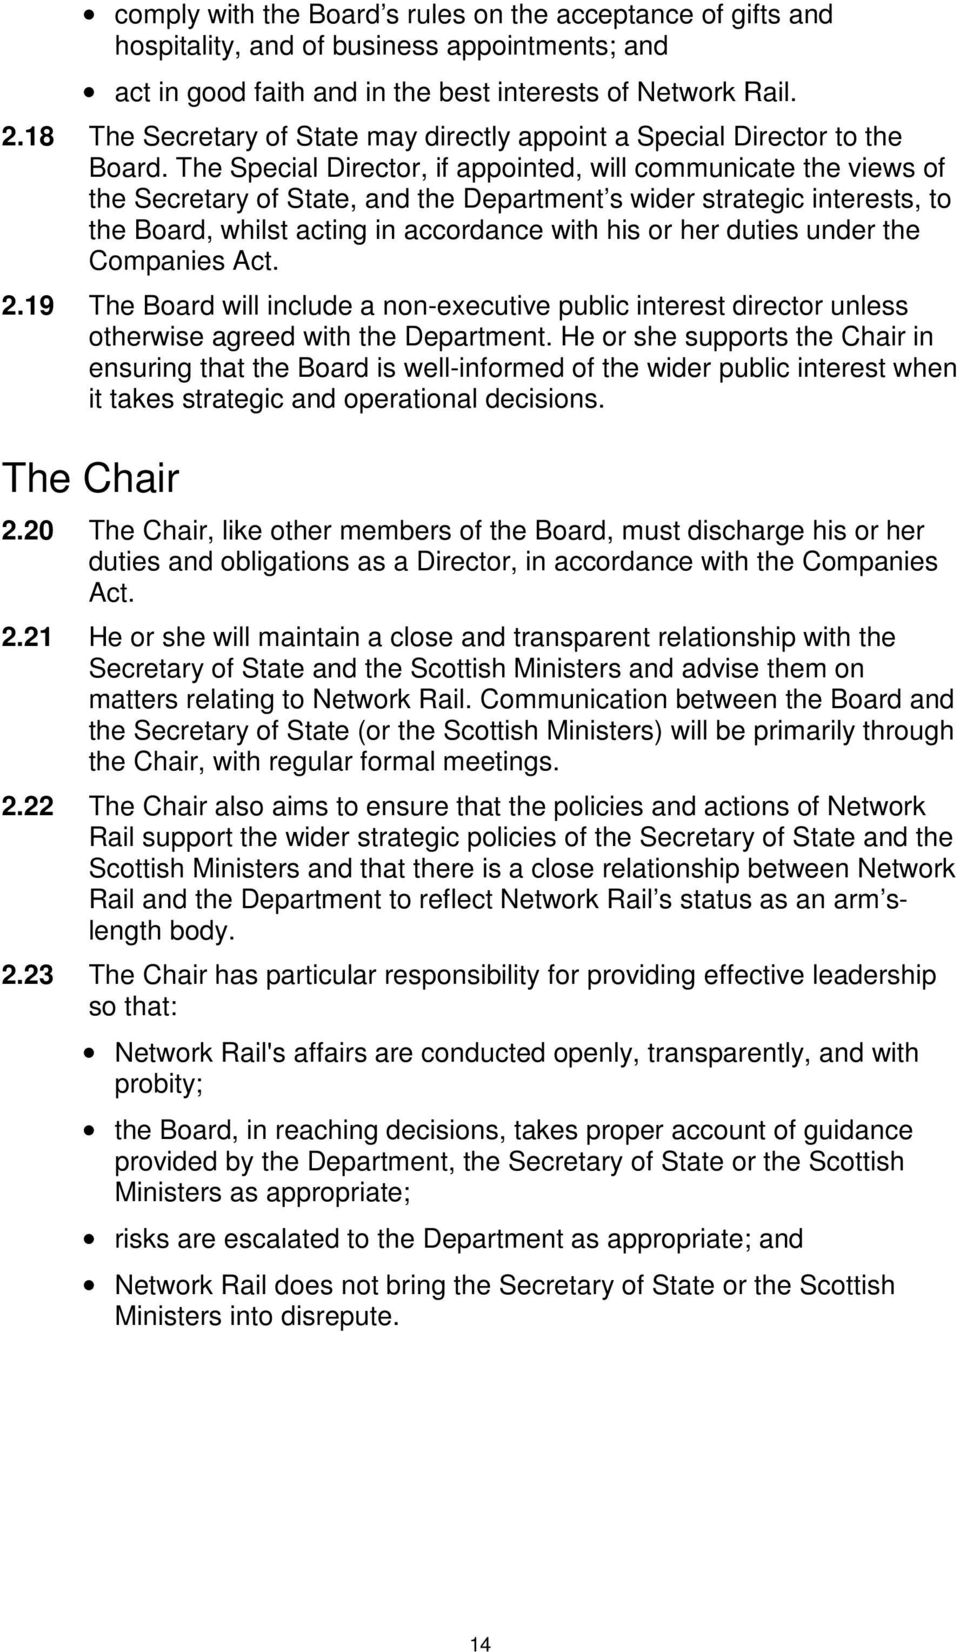 The Special Director, if appointed, will communicate the views of the Secretary of State, and the Department s wider strategic interests, to the Board, whilst acting in accordance with his or her